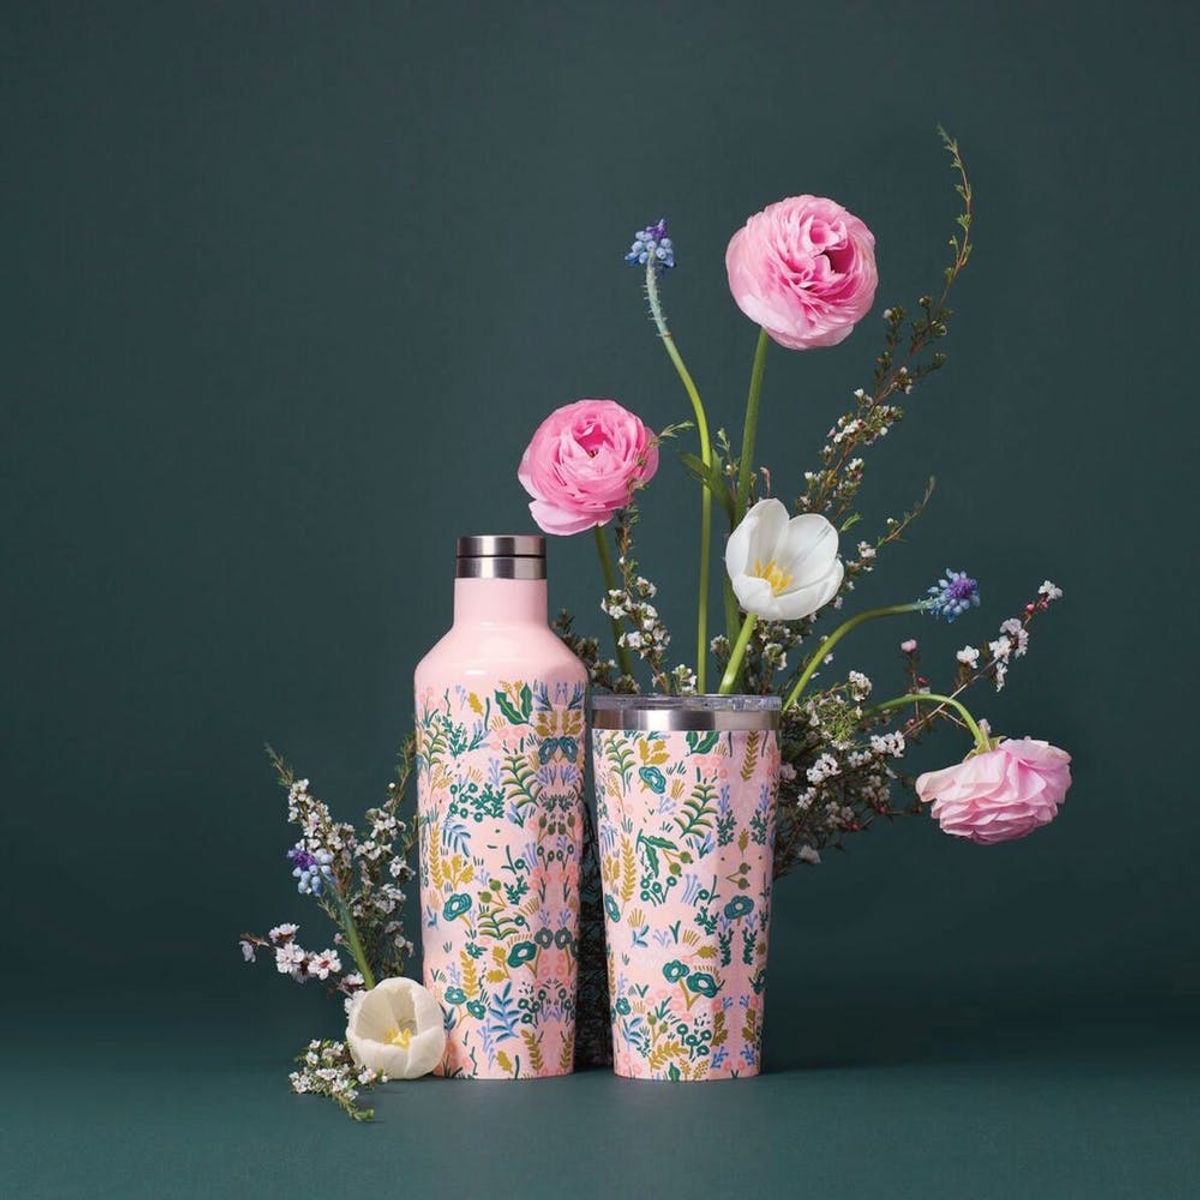 Rifle Paper Co. x Corkcicle’s Flower-Covered Water Bottle Collection Is Seriously Stunning